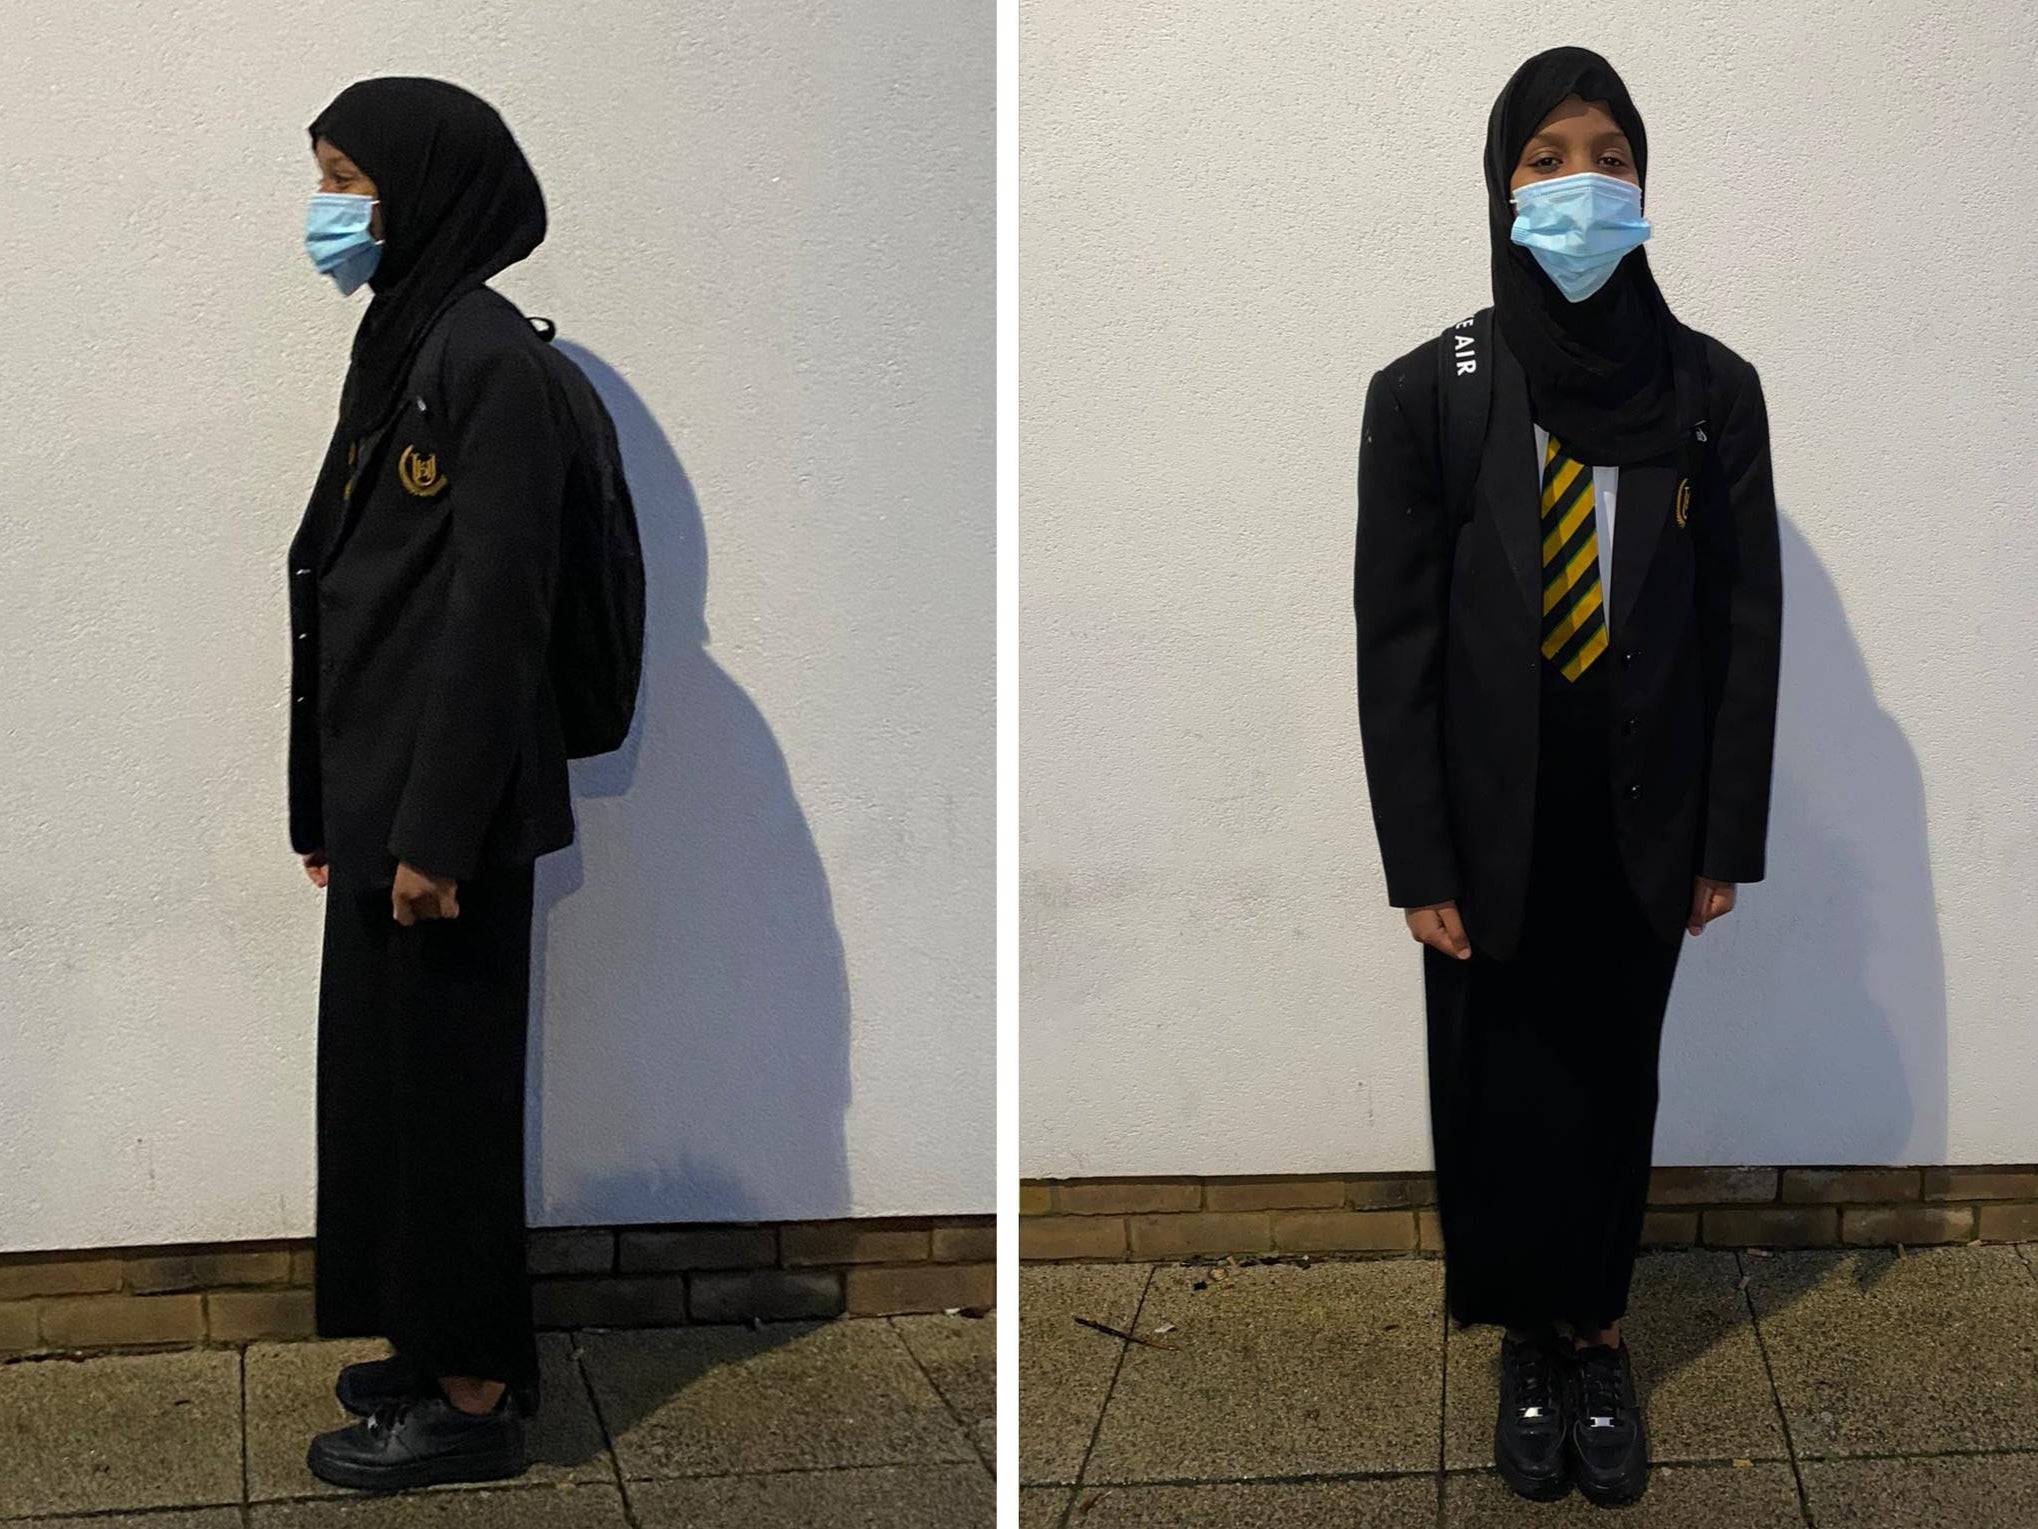 Muslim Student Was Sent Home From School For Not Wearing Short Skirt